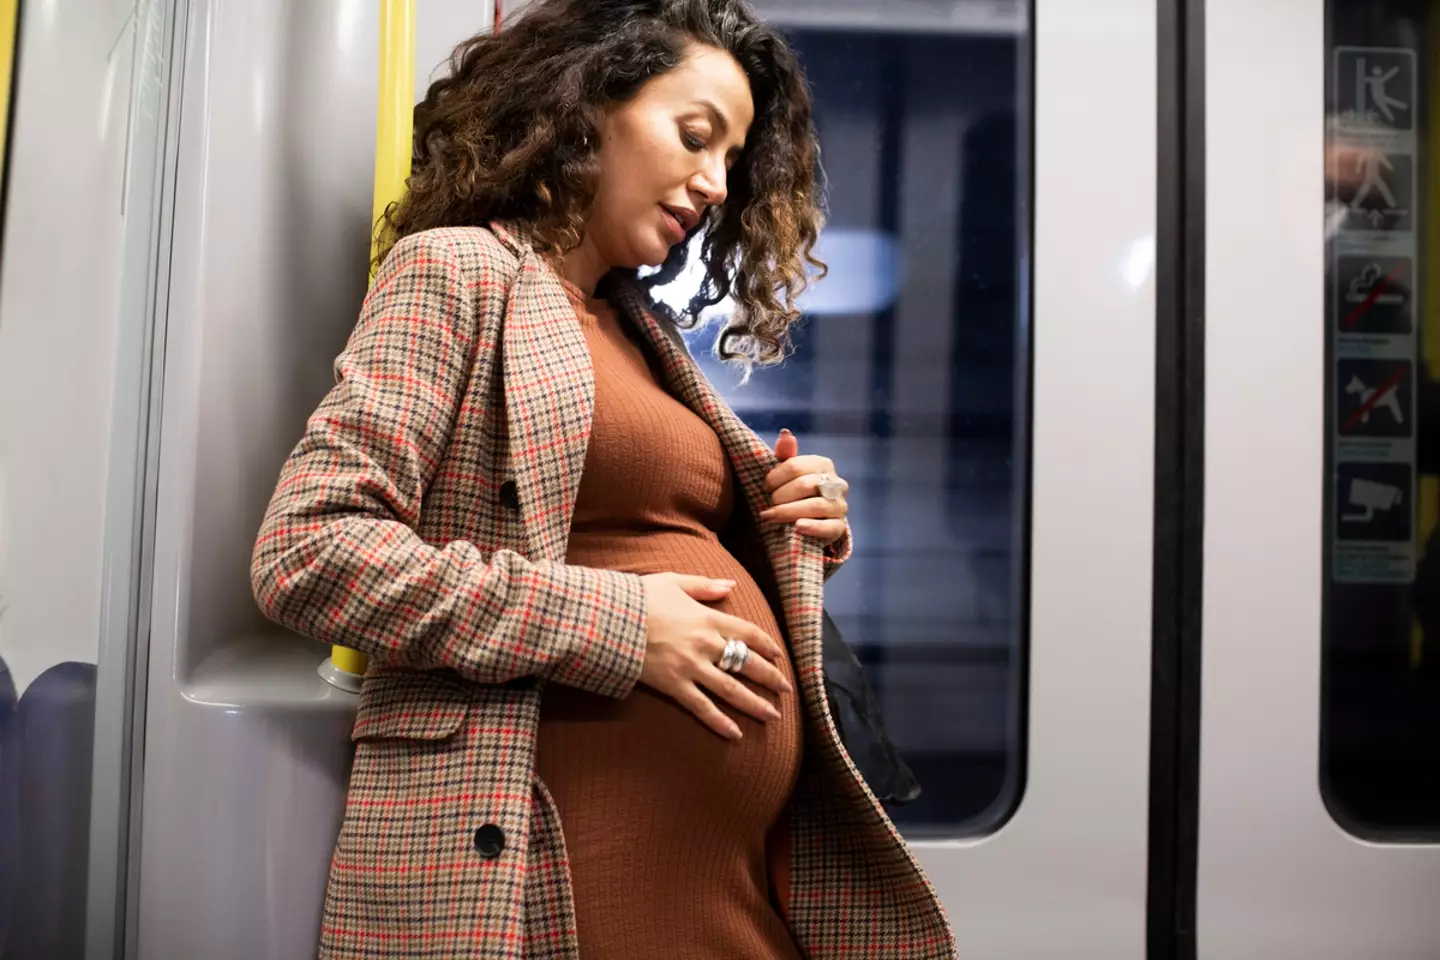 A man has explained why he refused to give up his seat on a packed train for a pregnant woman (stock image).